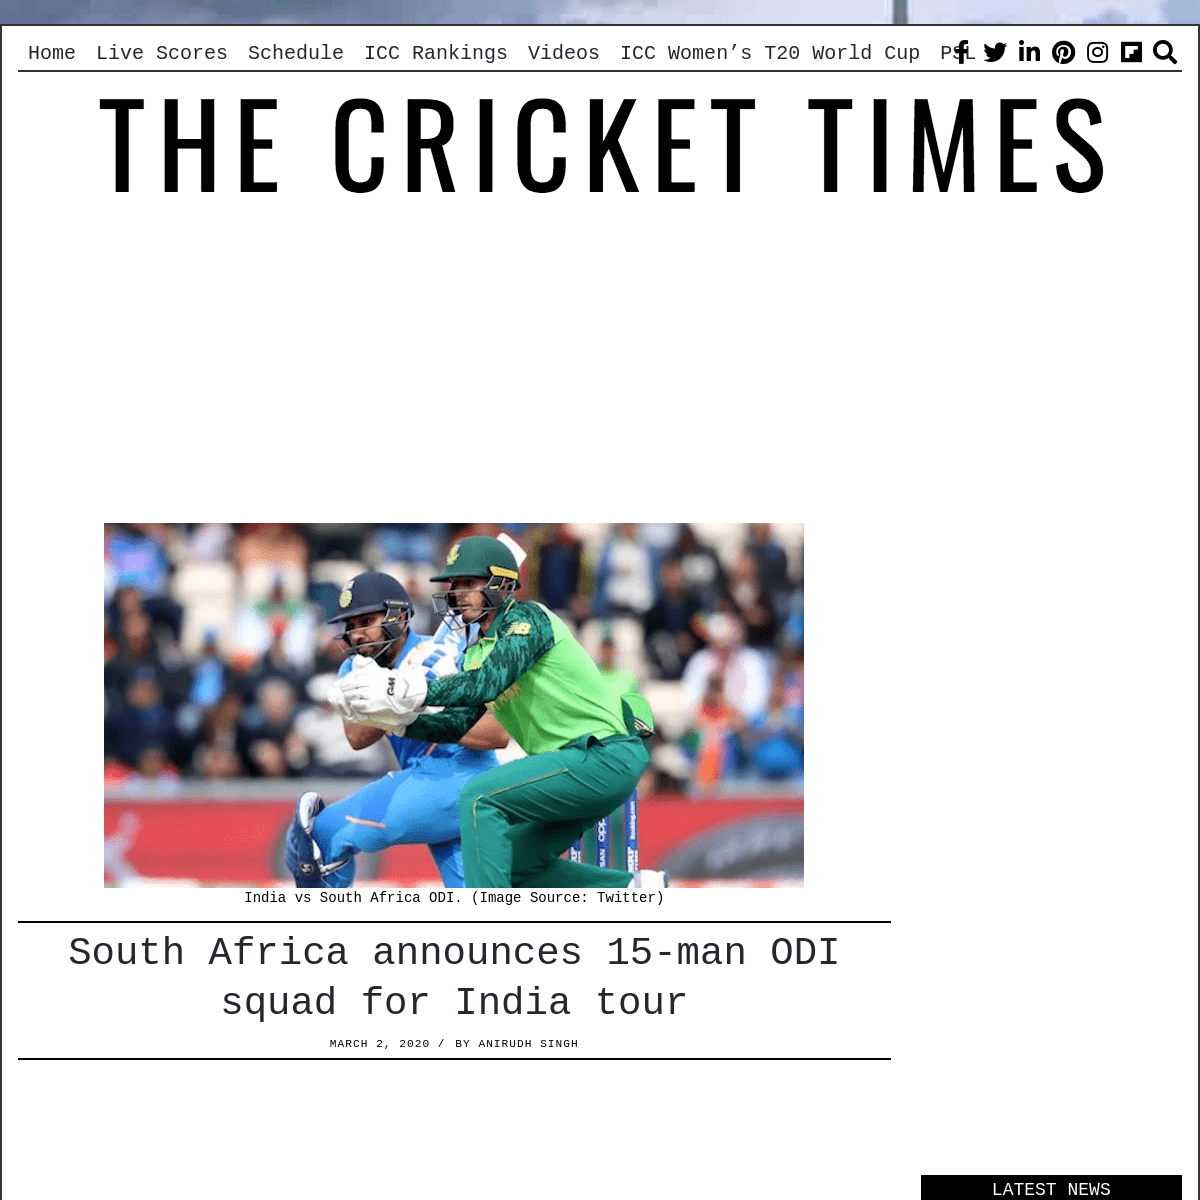 A complete backup of crickettimes.com/2020/03/south-africa-announces-15-man-odi-squad-for-india-tour/